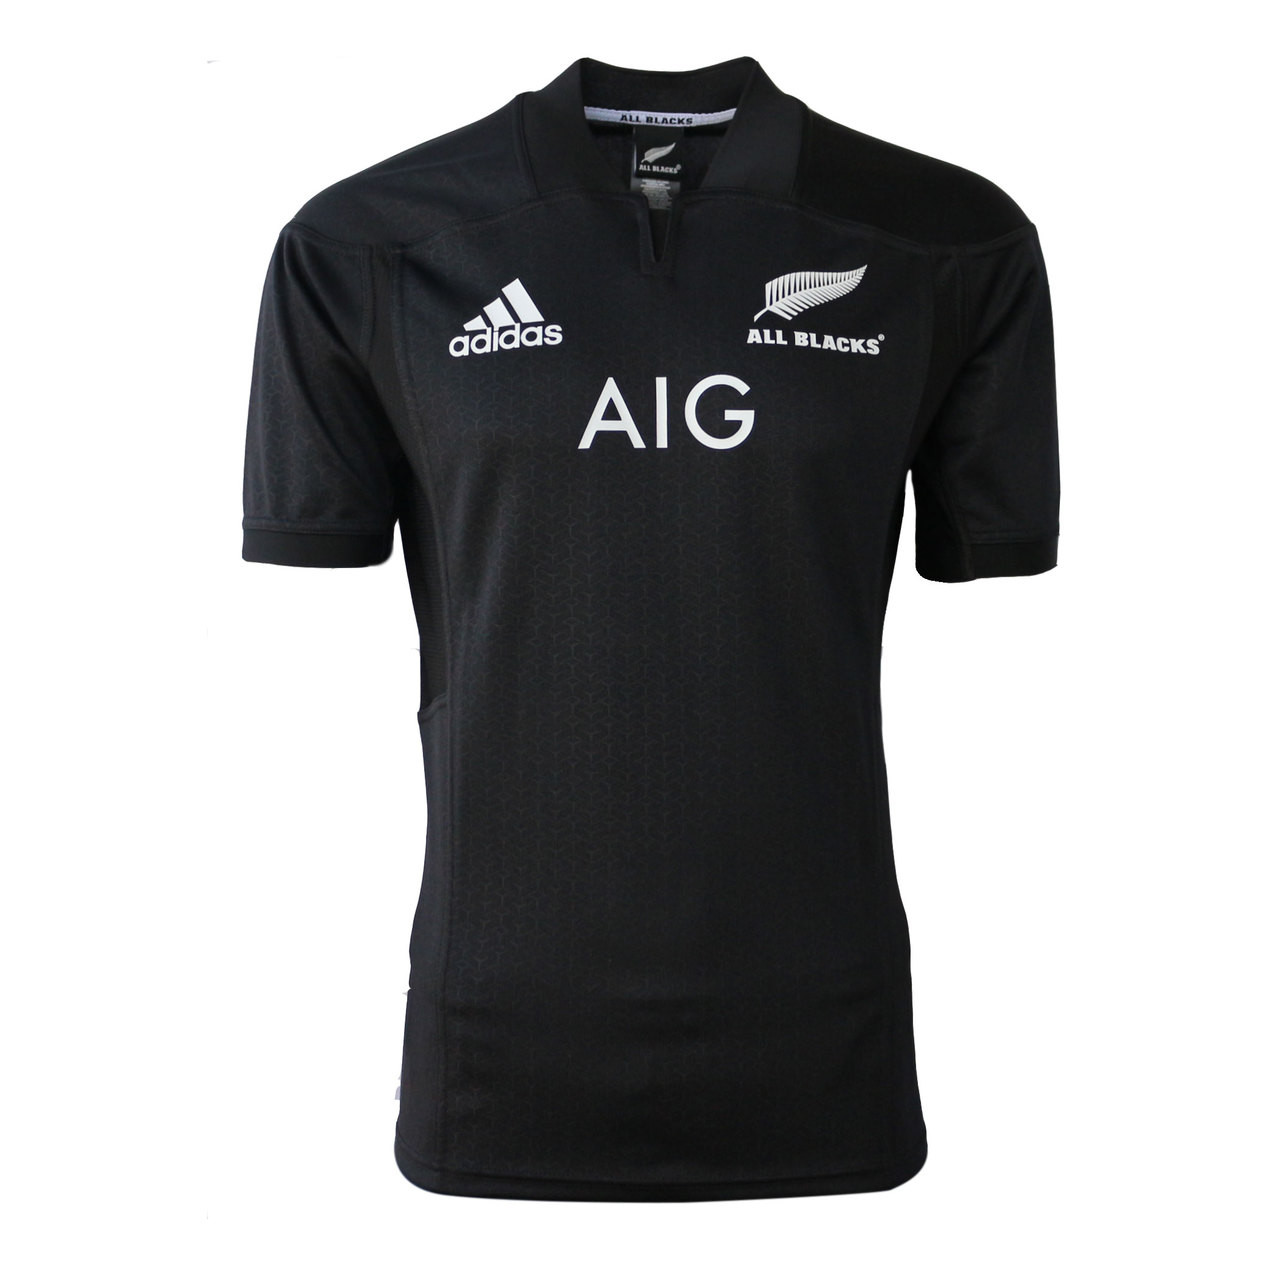 New Zealand All Blacks 2016/17 Home Rugby Jersey | eBay